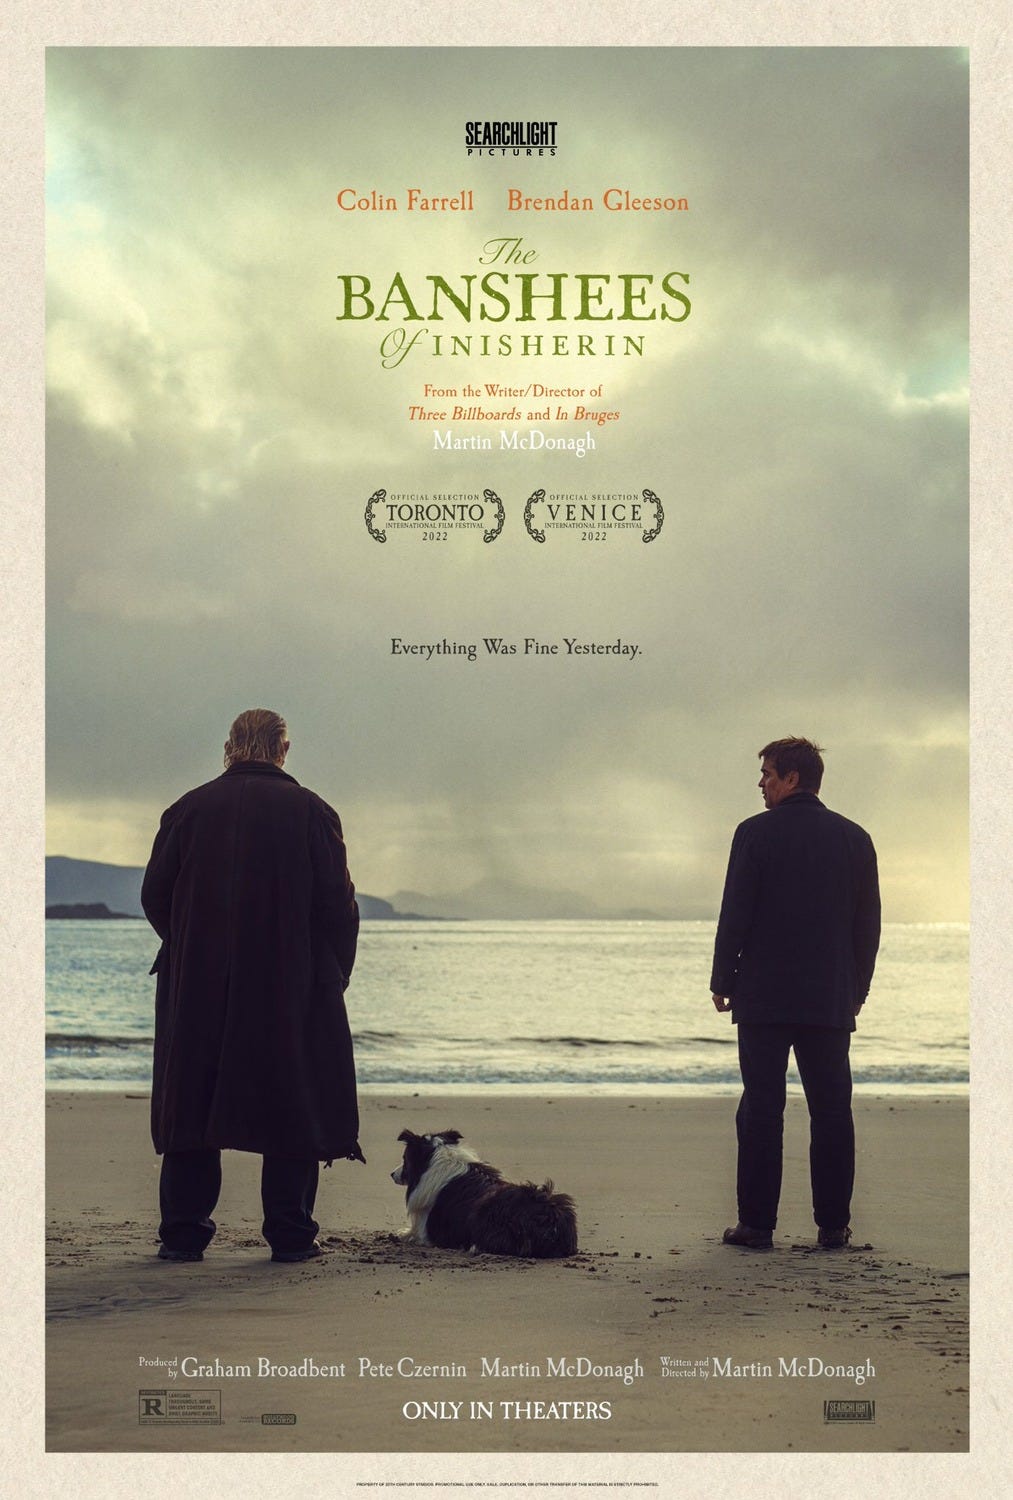 A movie poster for The Banshees of Inisherin. The two main male character have their backs to the viewer as they watch the ocean. A black and white collie is also present.